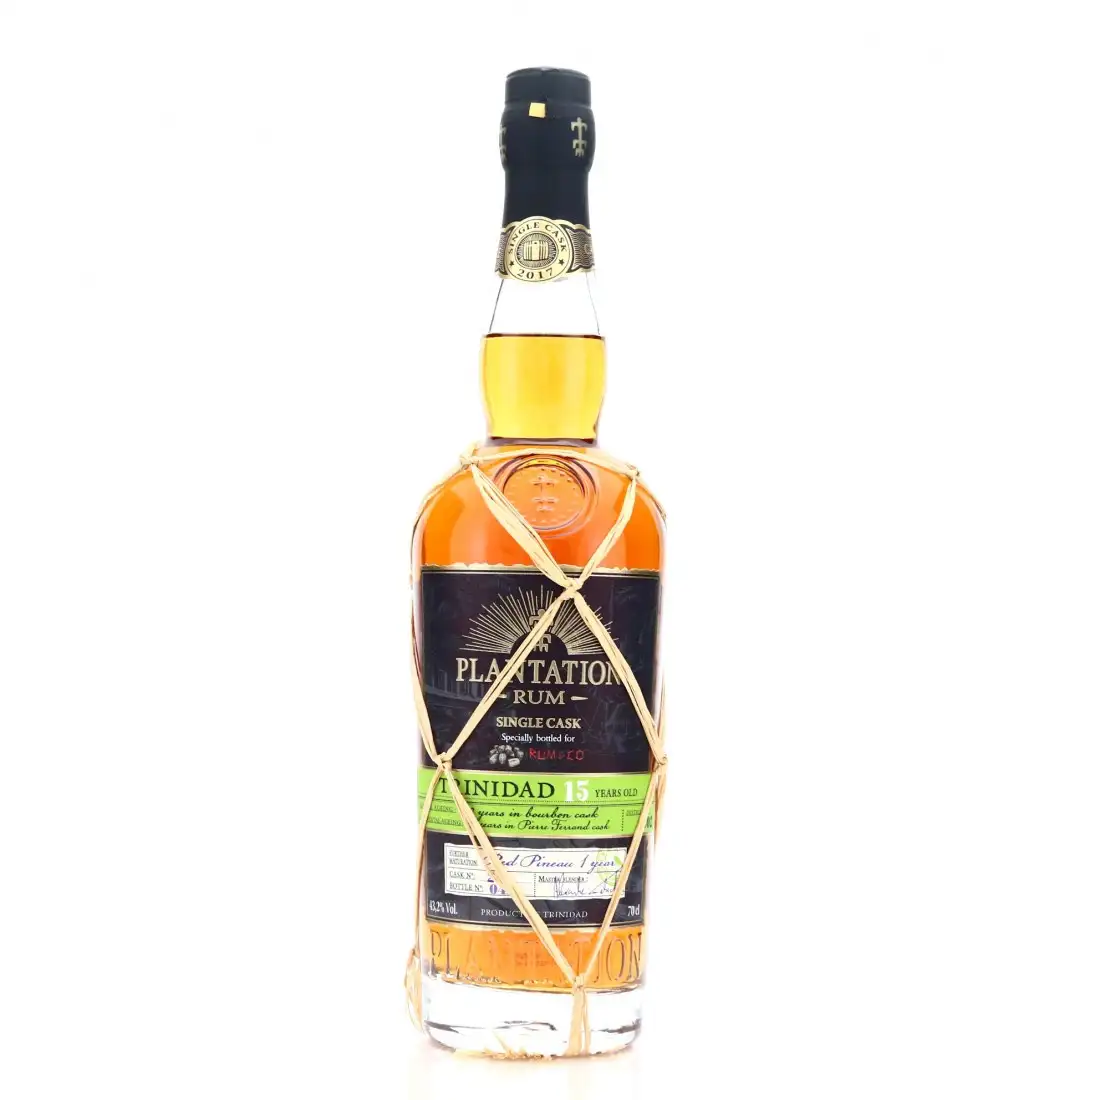 Image of the front of the bottle of the rum Plantation Trinidad Single Cask